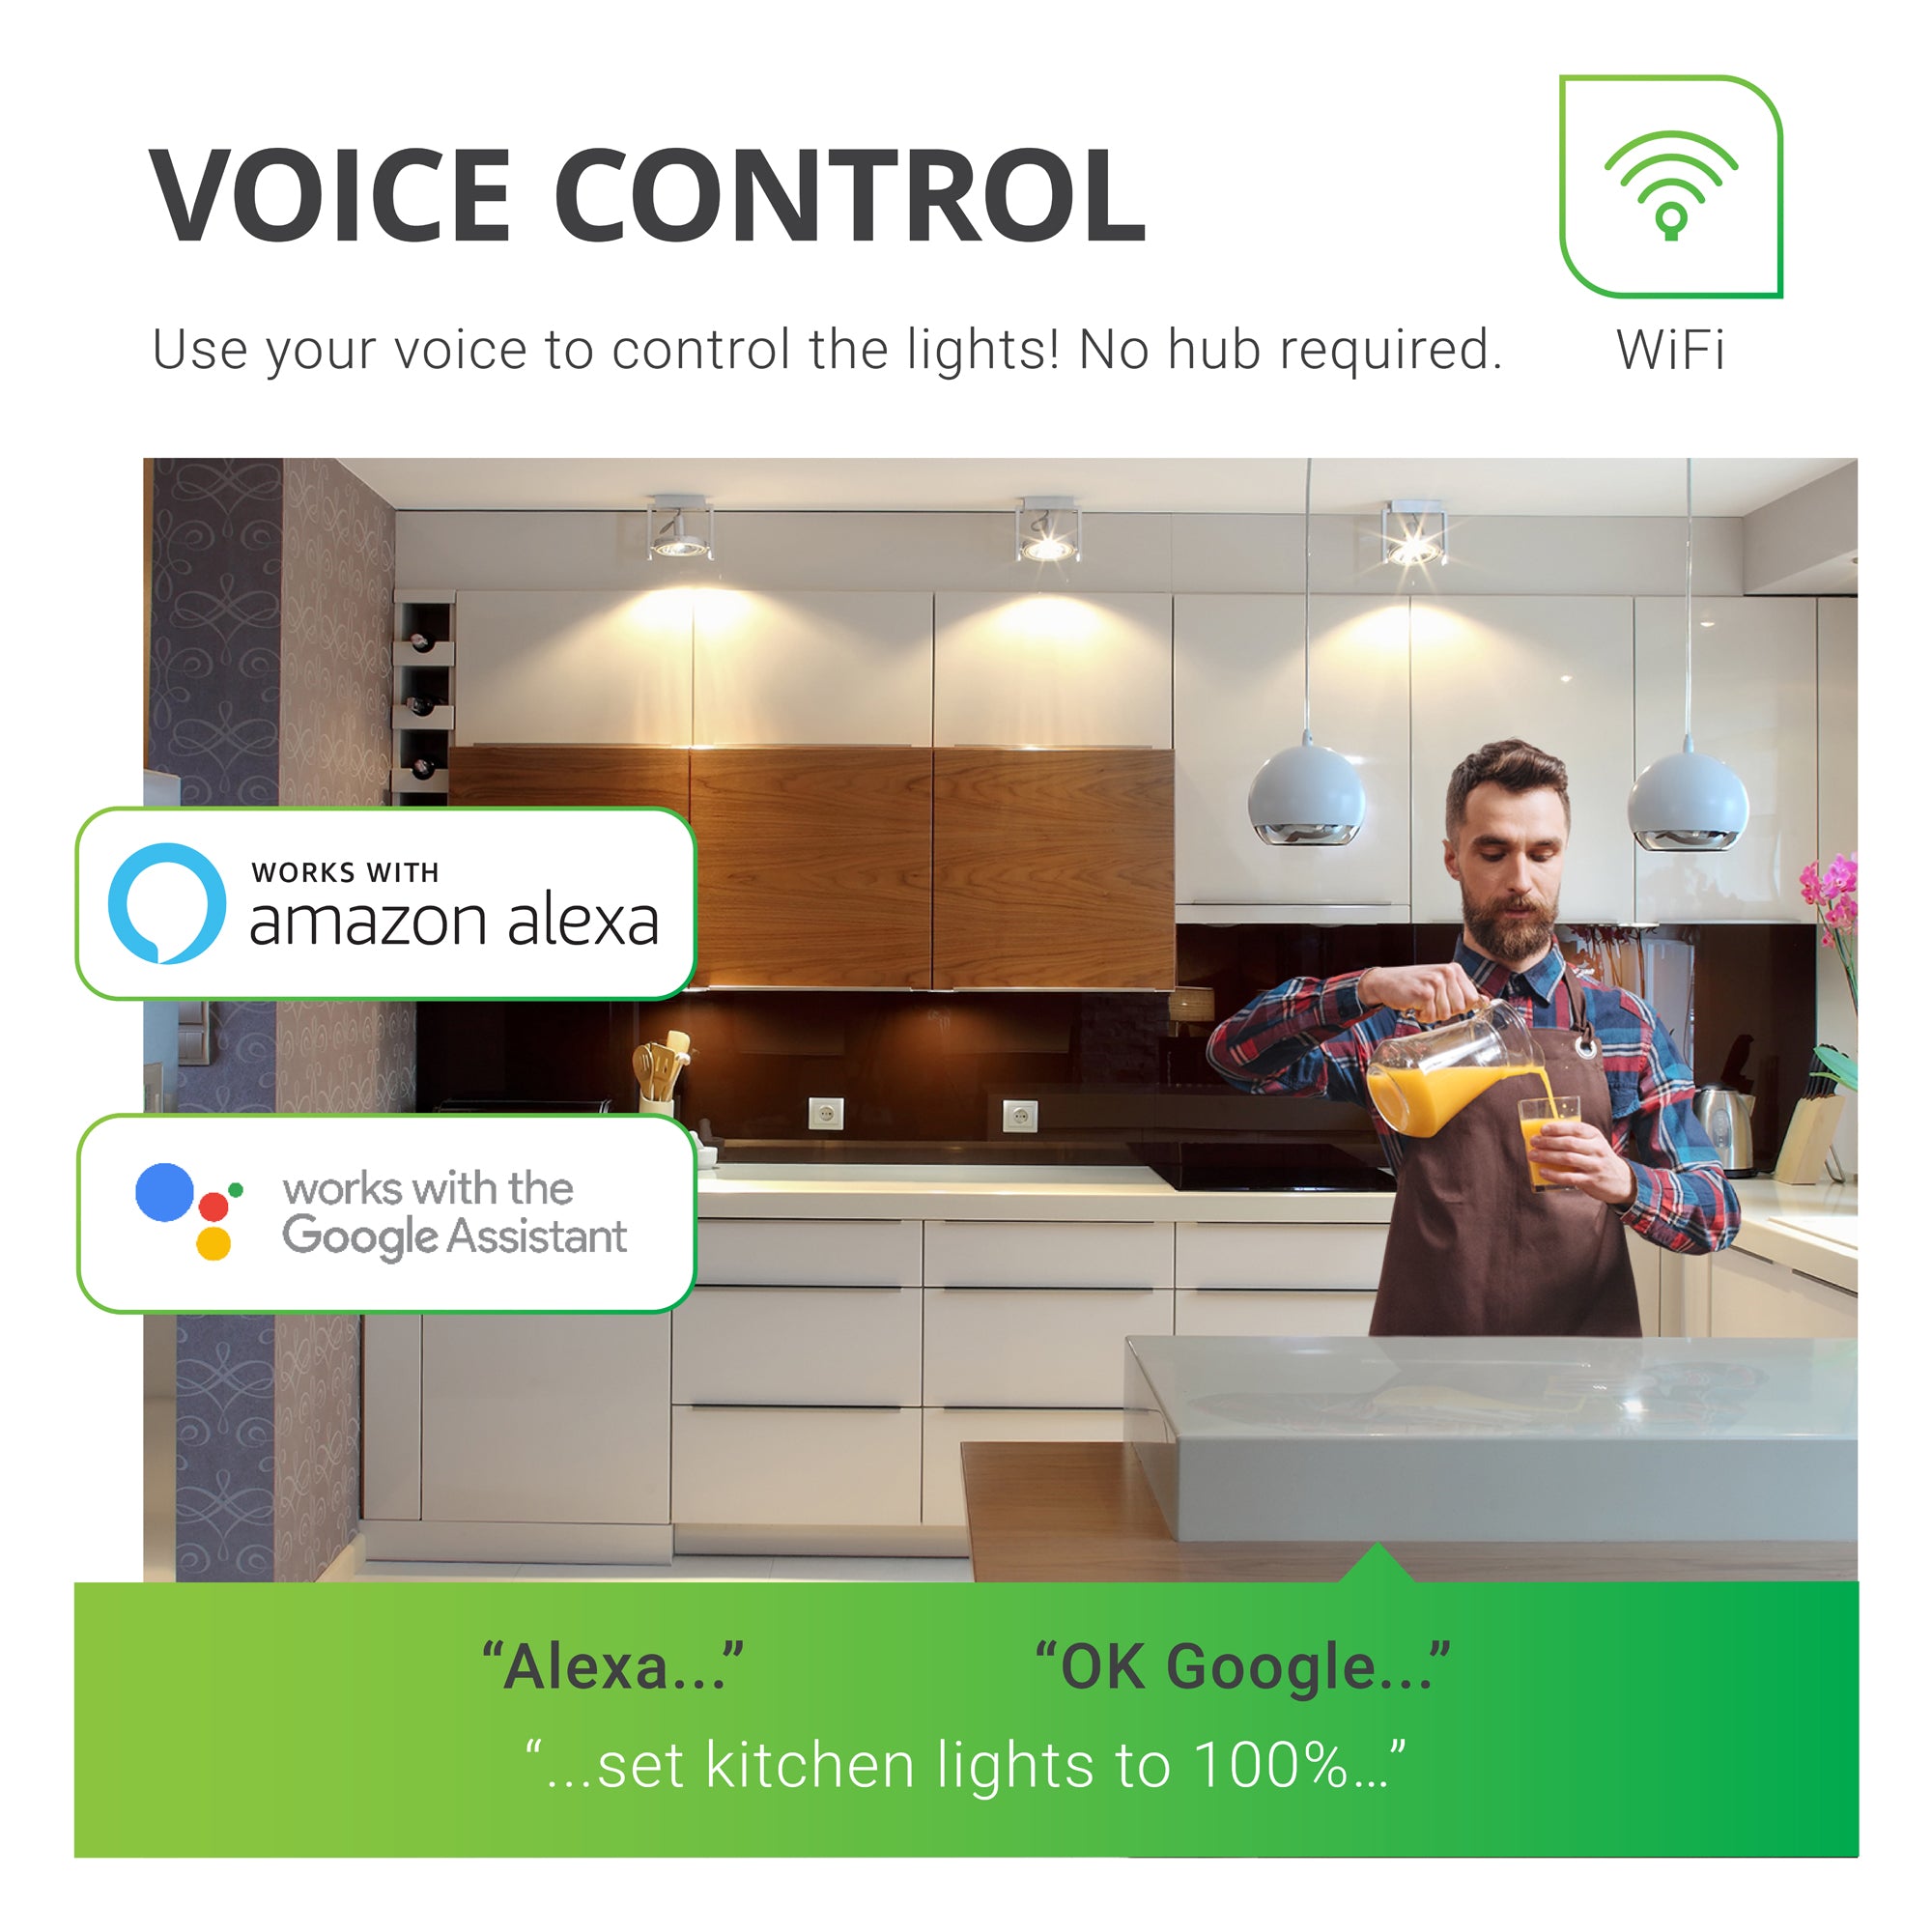 Voice Control. Use your voice to control the lights with your Sunco PAR30 LED Smart Bulb. No hub required for control. However, voice control works with Alexa and Google Assistant in coordination with the Smart Life App and your smart device.